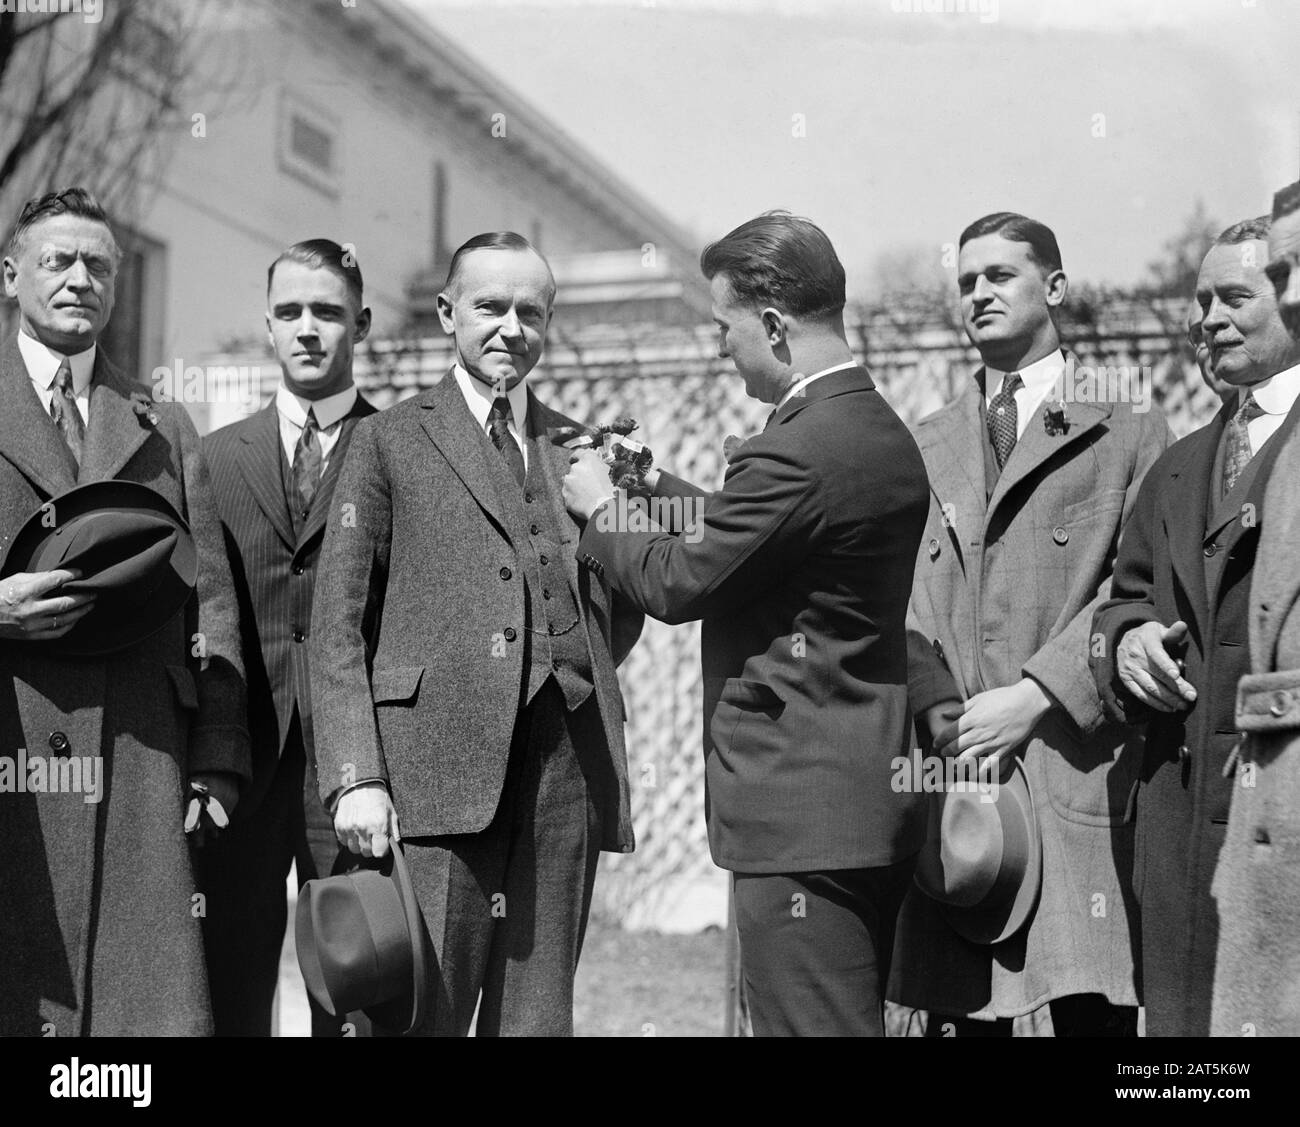 Captain William Homer Carroll, Member of the Veterans of Foreign Wars Delegation, pinning first VFW 'Buddy Poppy' on Lapel of U.S. President Calvin Coolidge, Washington, D.C., USA, National Photo Company, March 19, 1924 Stock Photo